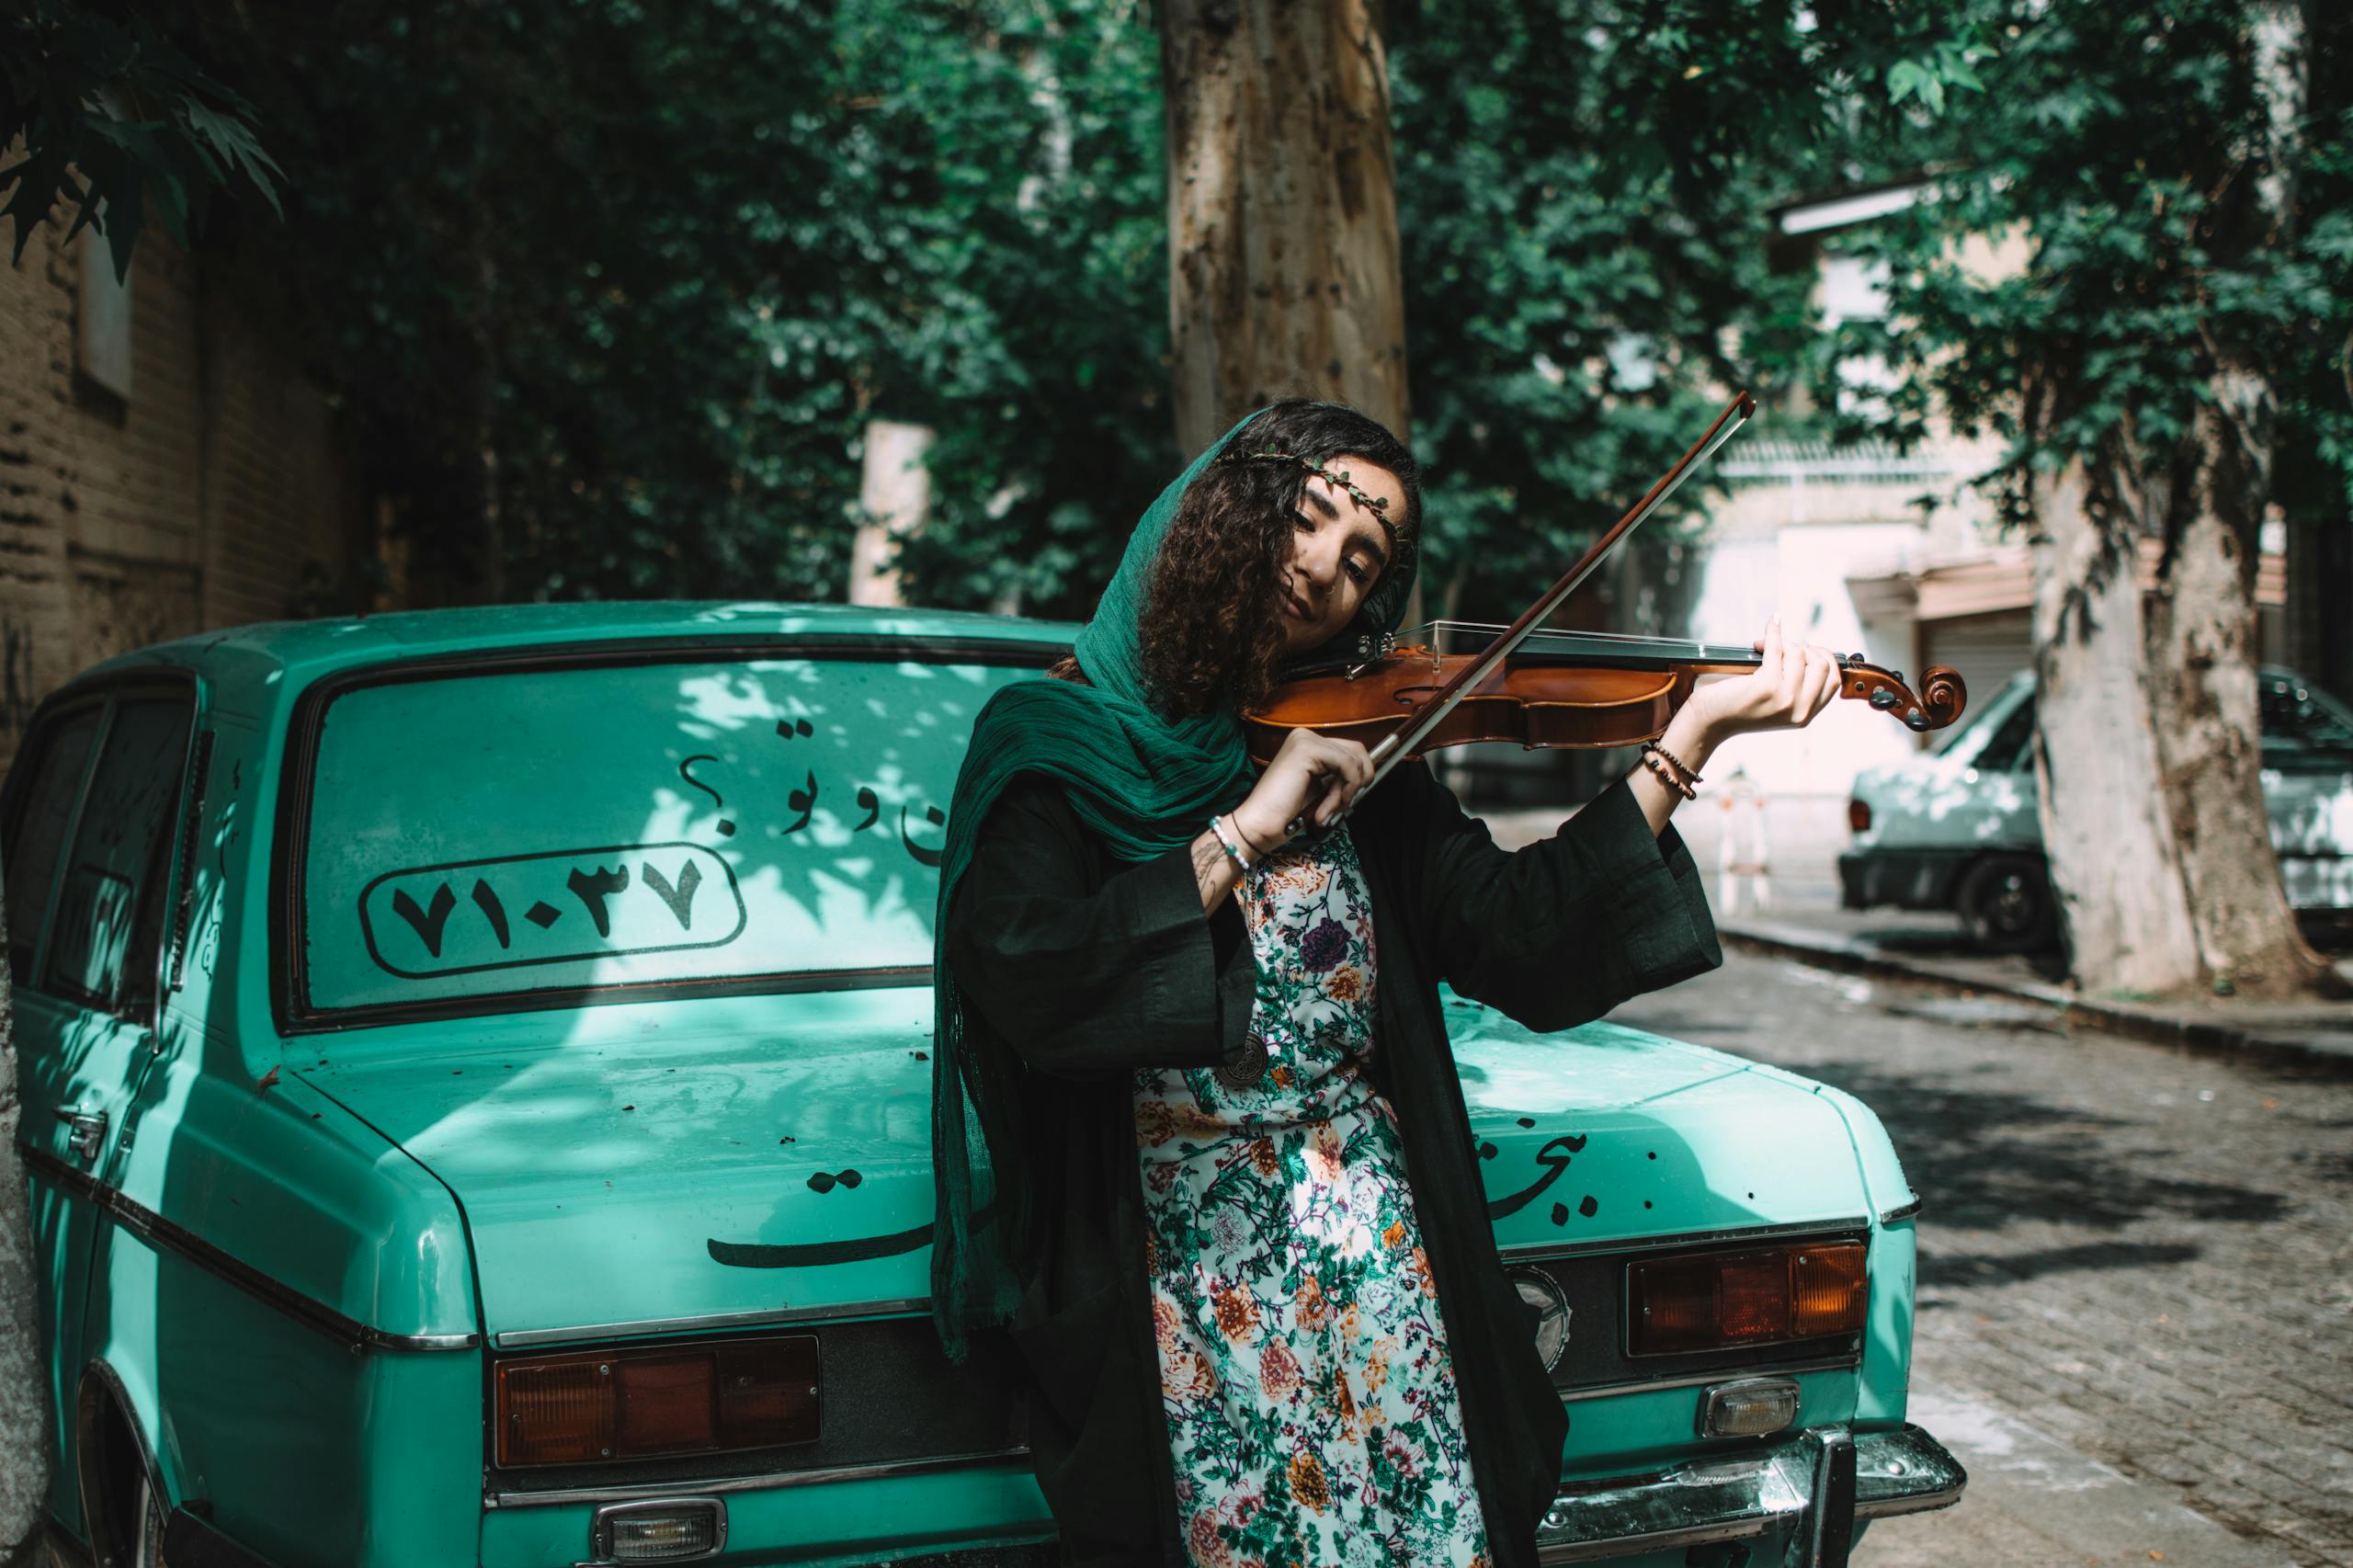 Woman Playing Violin While Leaning On Green Vehicle